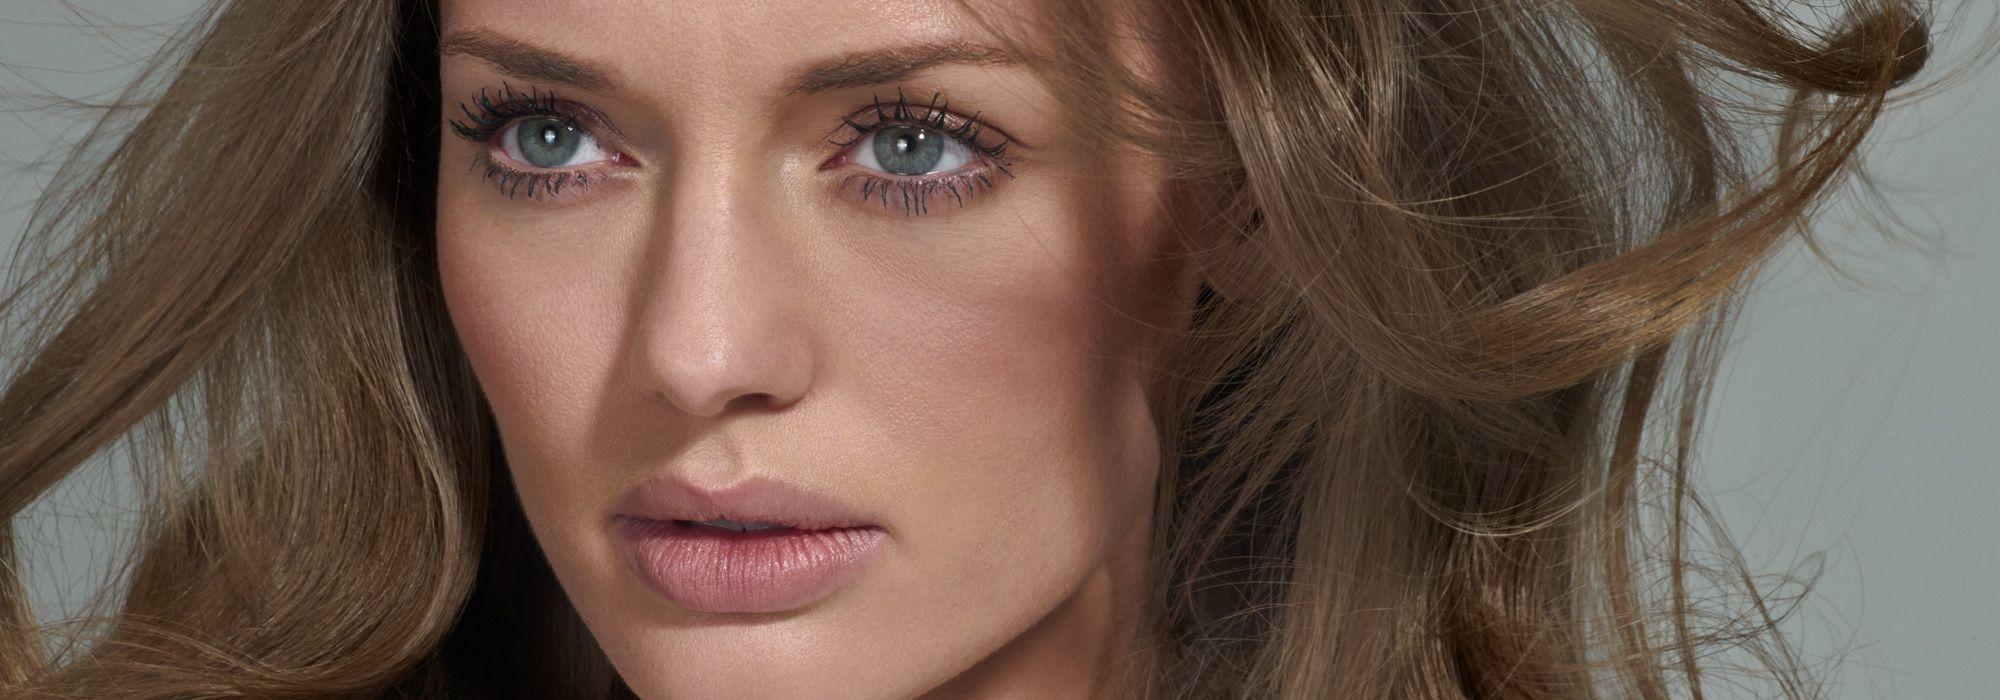 Laura Haddock Wallpaper for Facebook. Full HD Picture